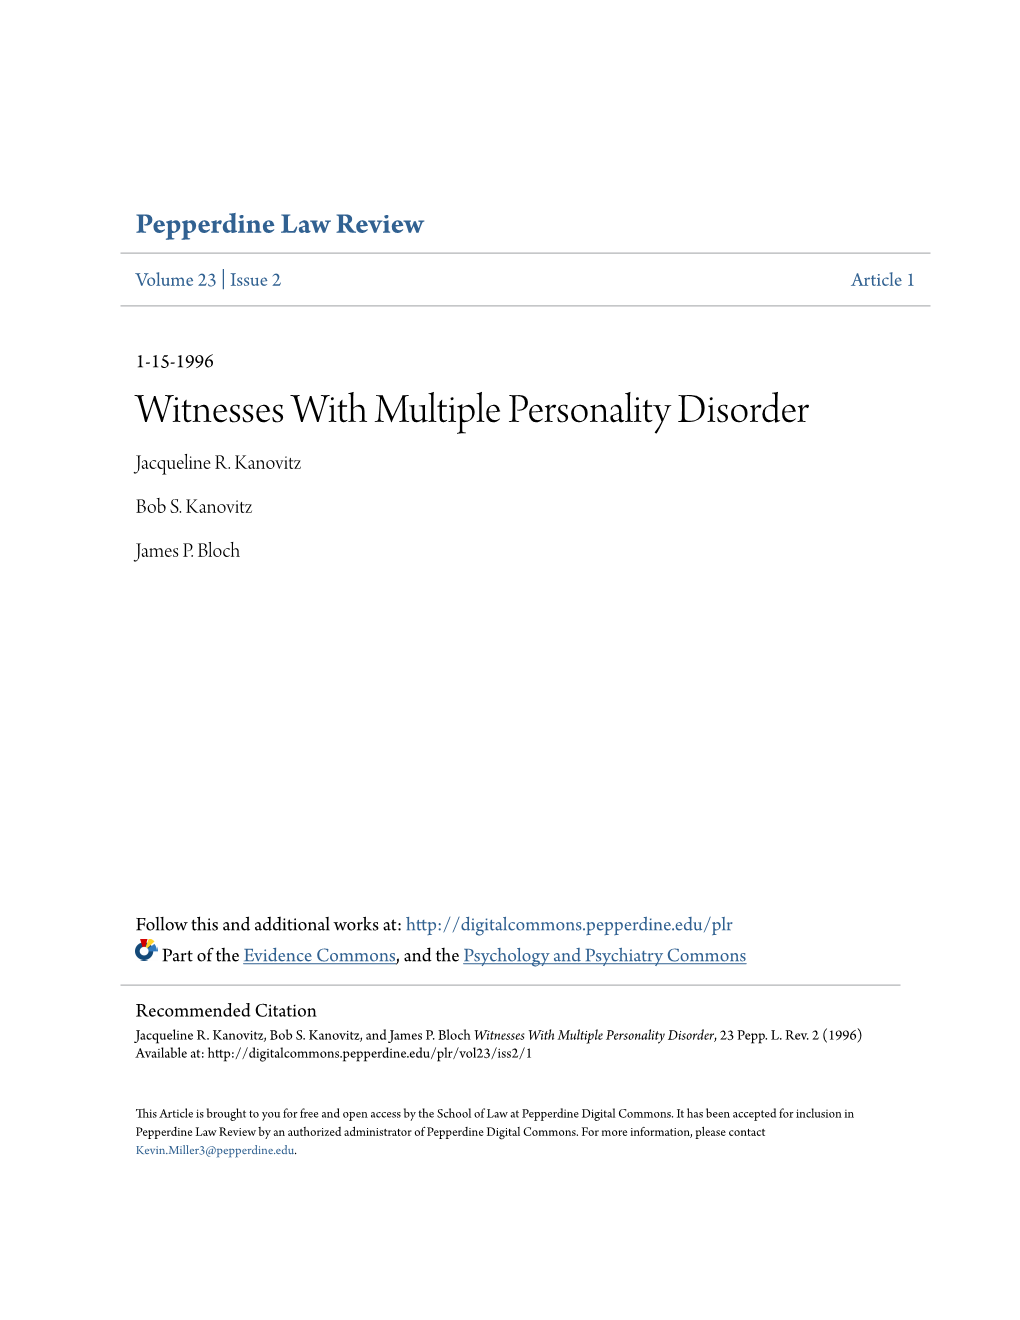 Witnesses with Multiple Personality Disorder Jacqueline R